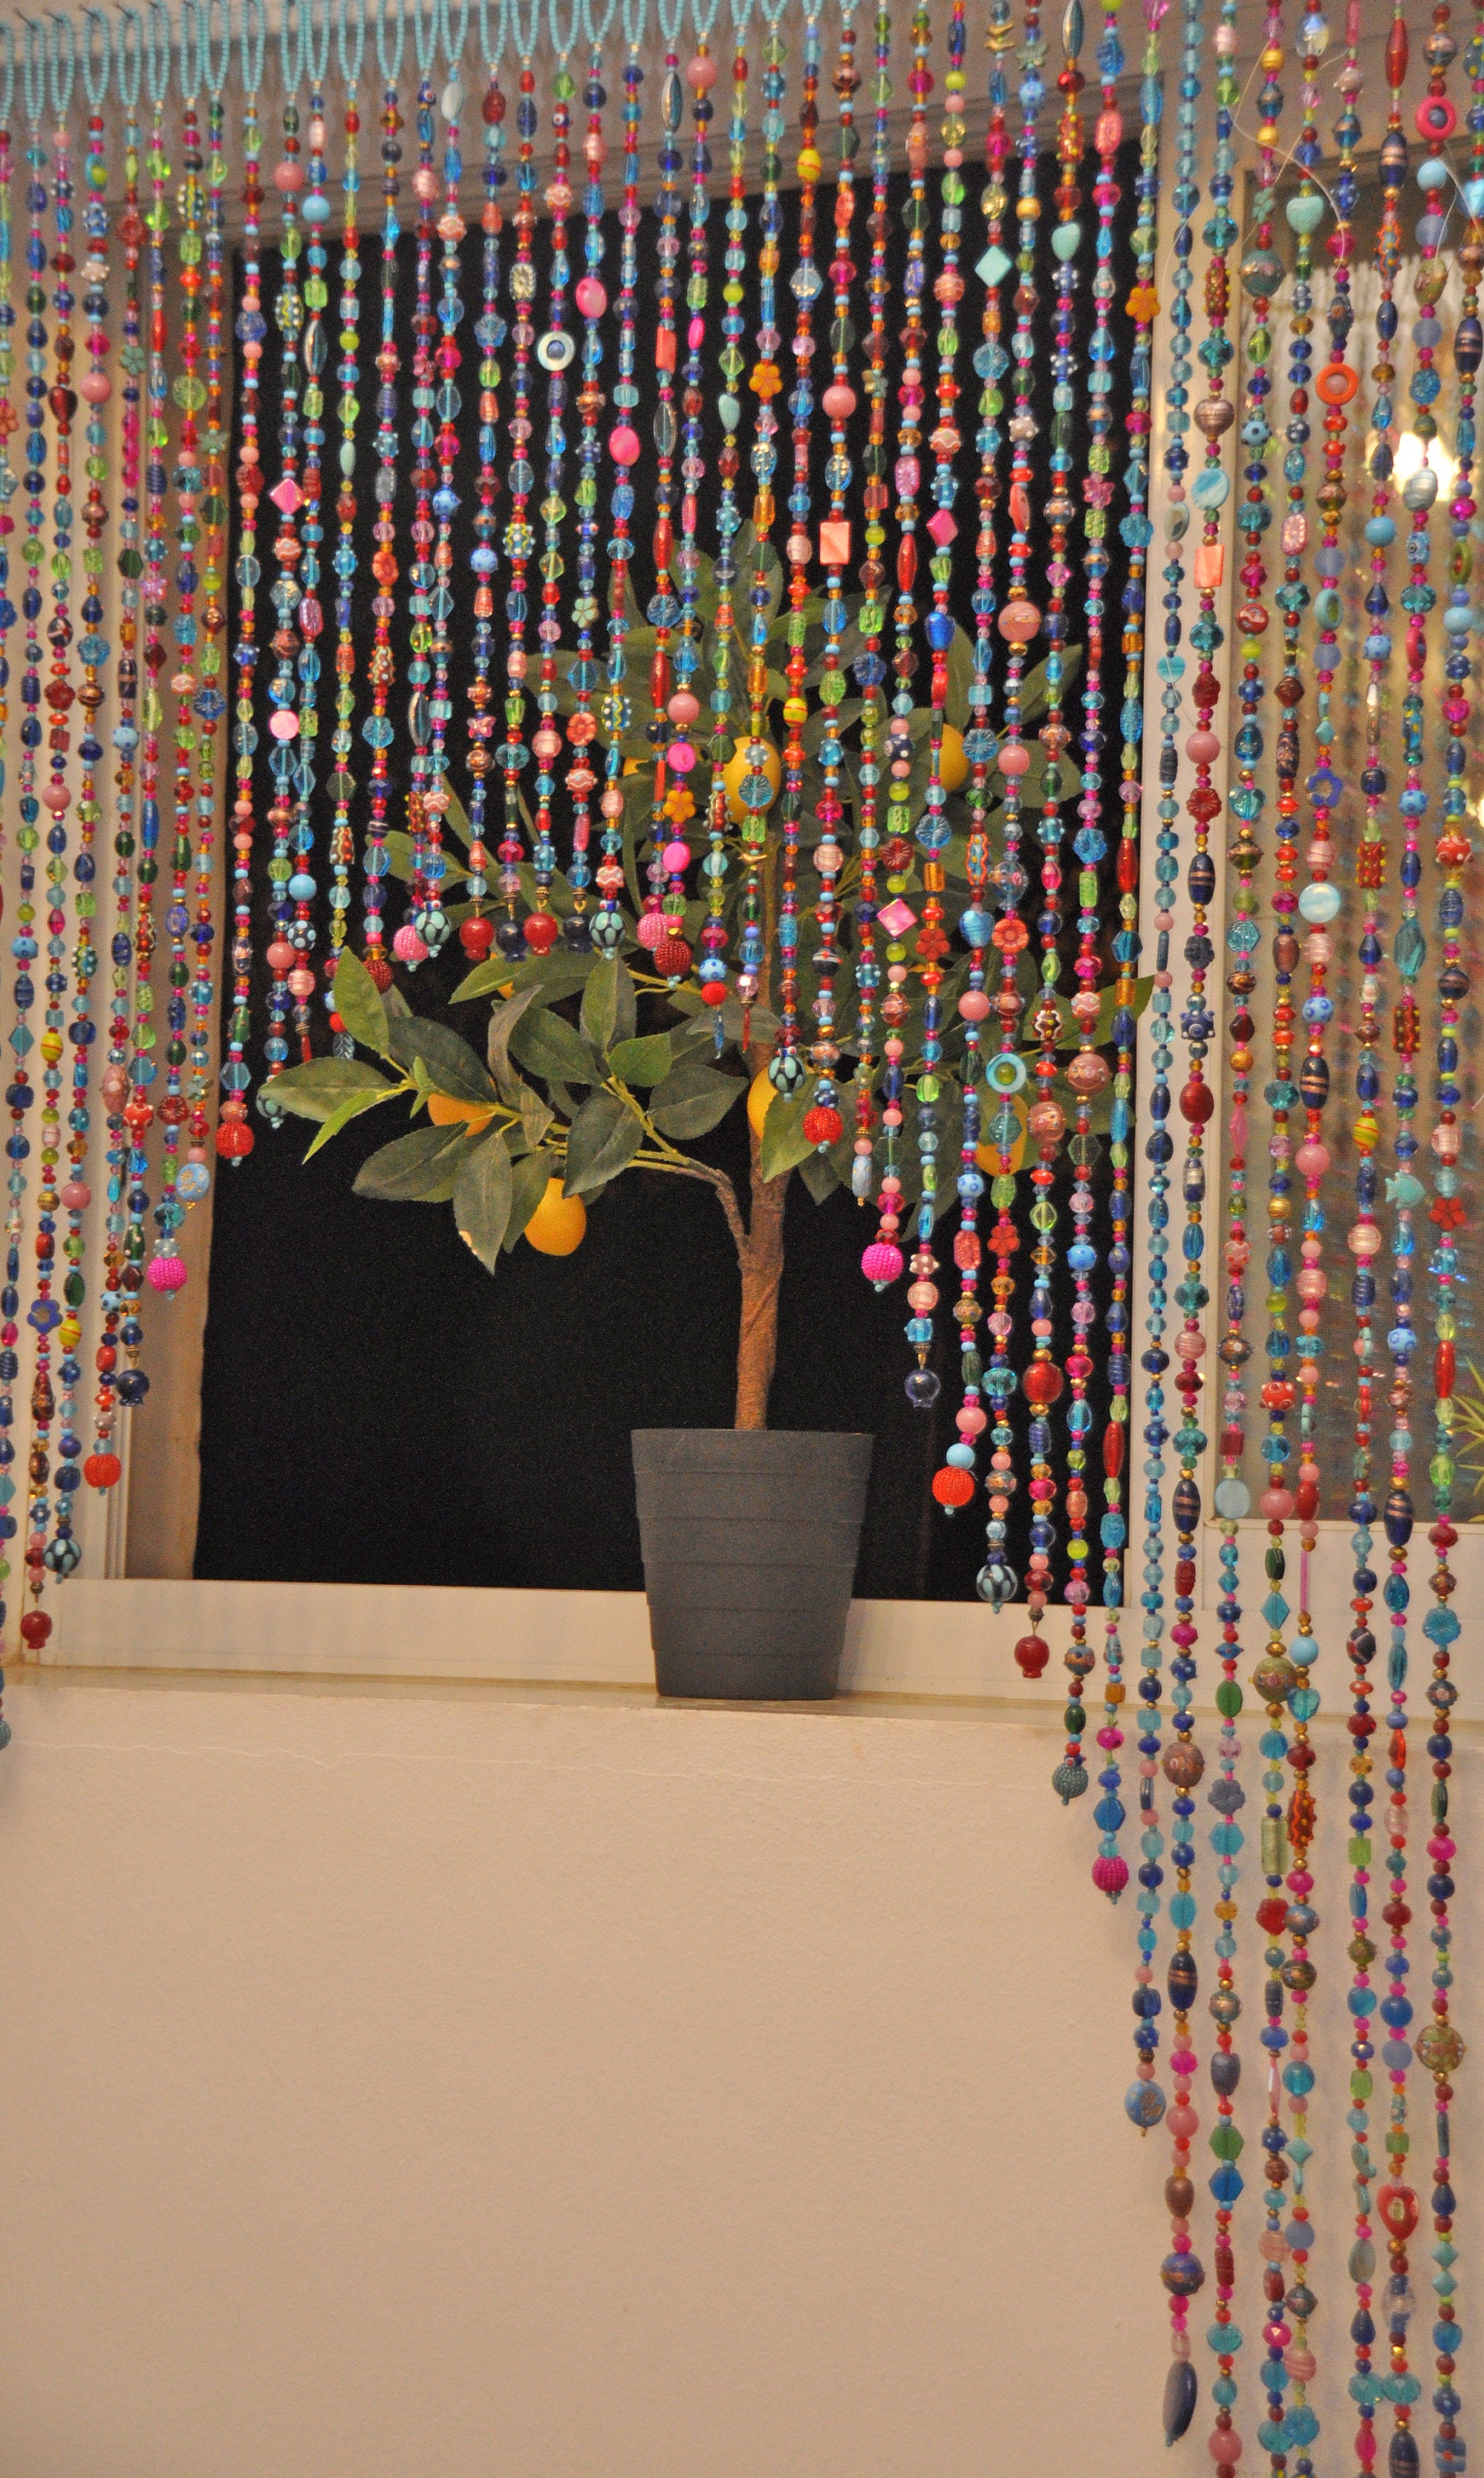 Best Eclectic Colorful Door Bead Curtain For Living Room Interior